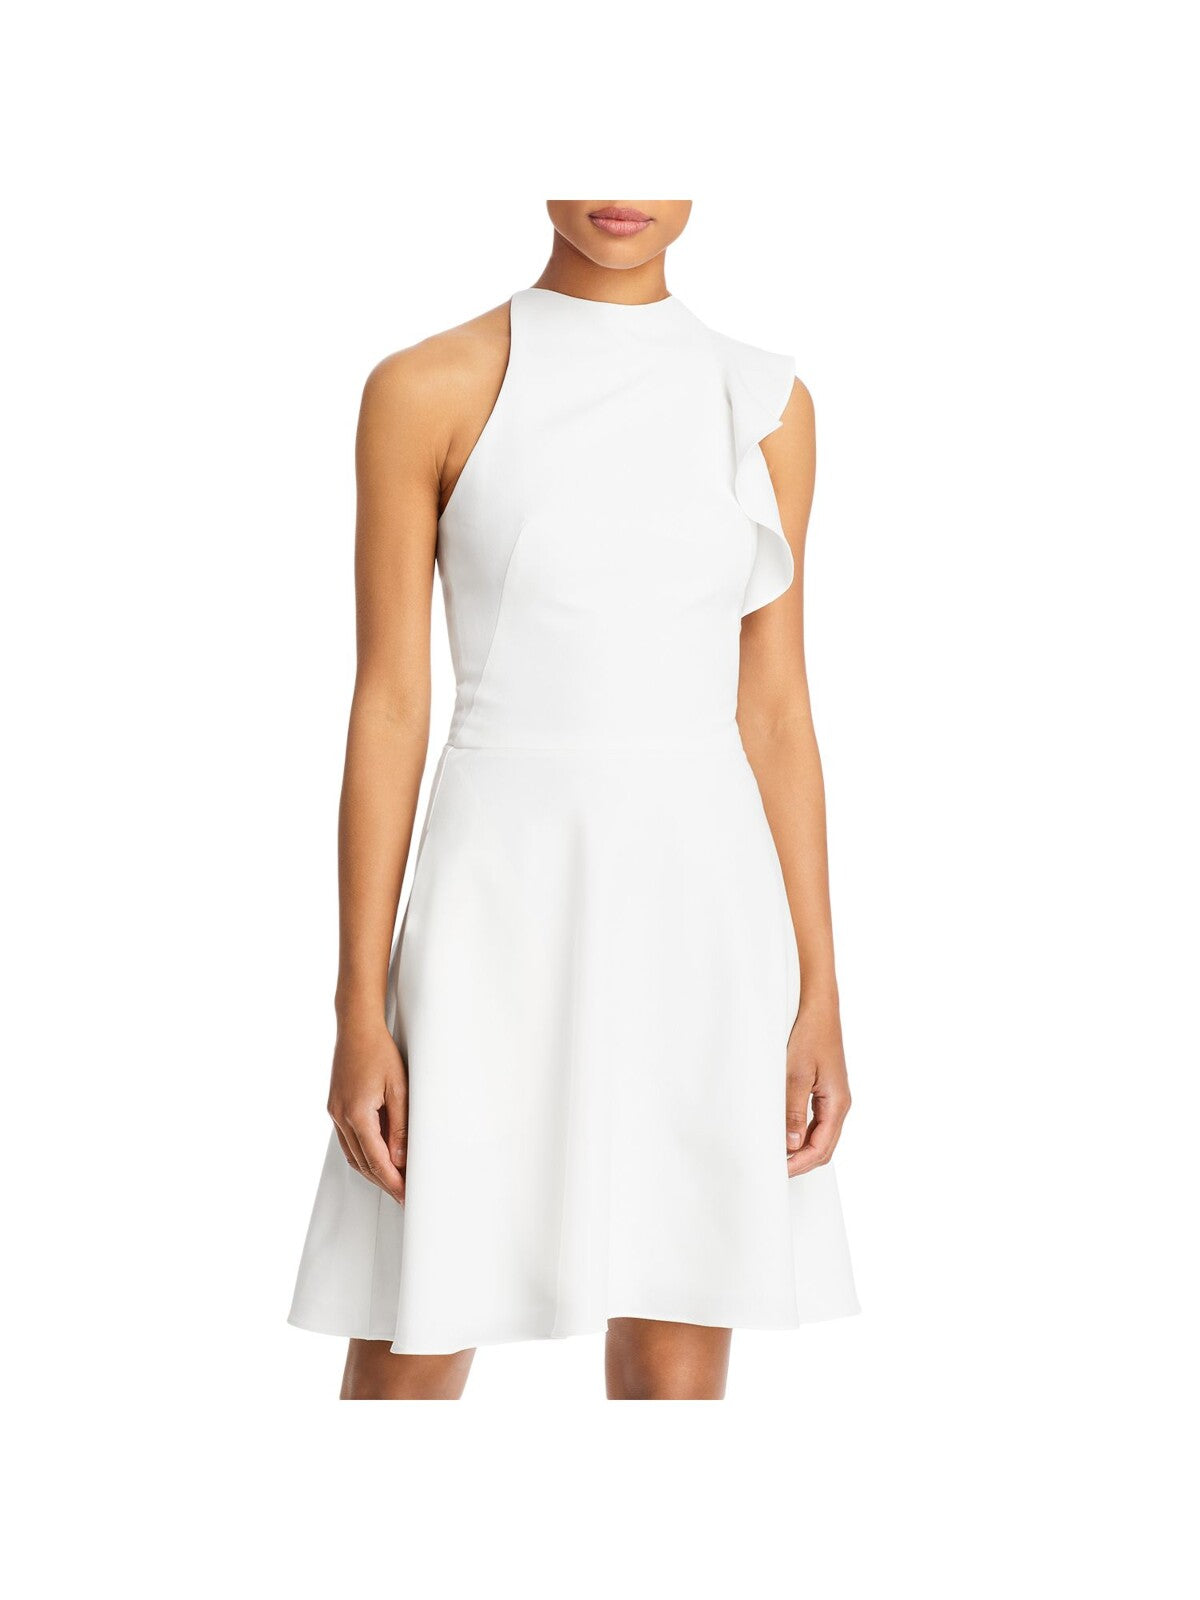 BLACK HALO Womens White Zippered Fitted Flutter Sleeve Jewel Neck Above The Knee Cocktail Fit + Flare Dress 6